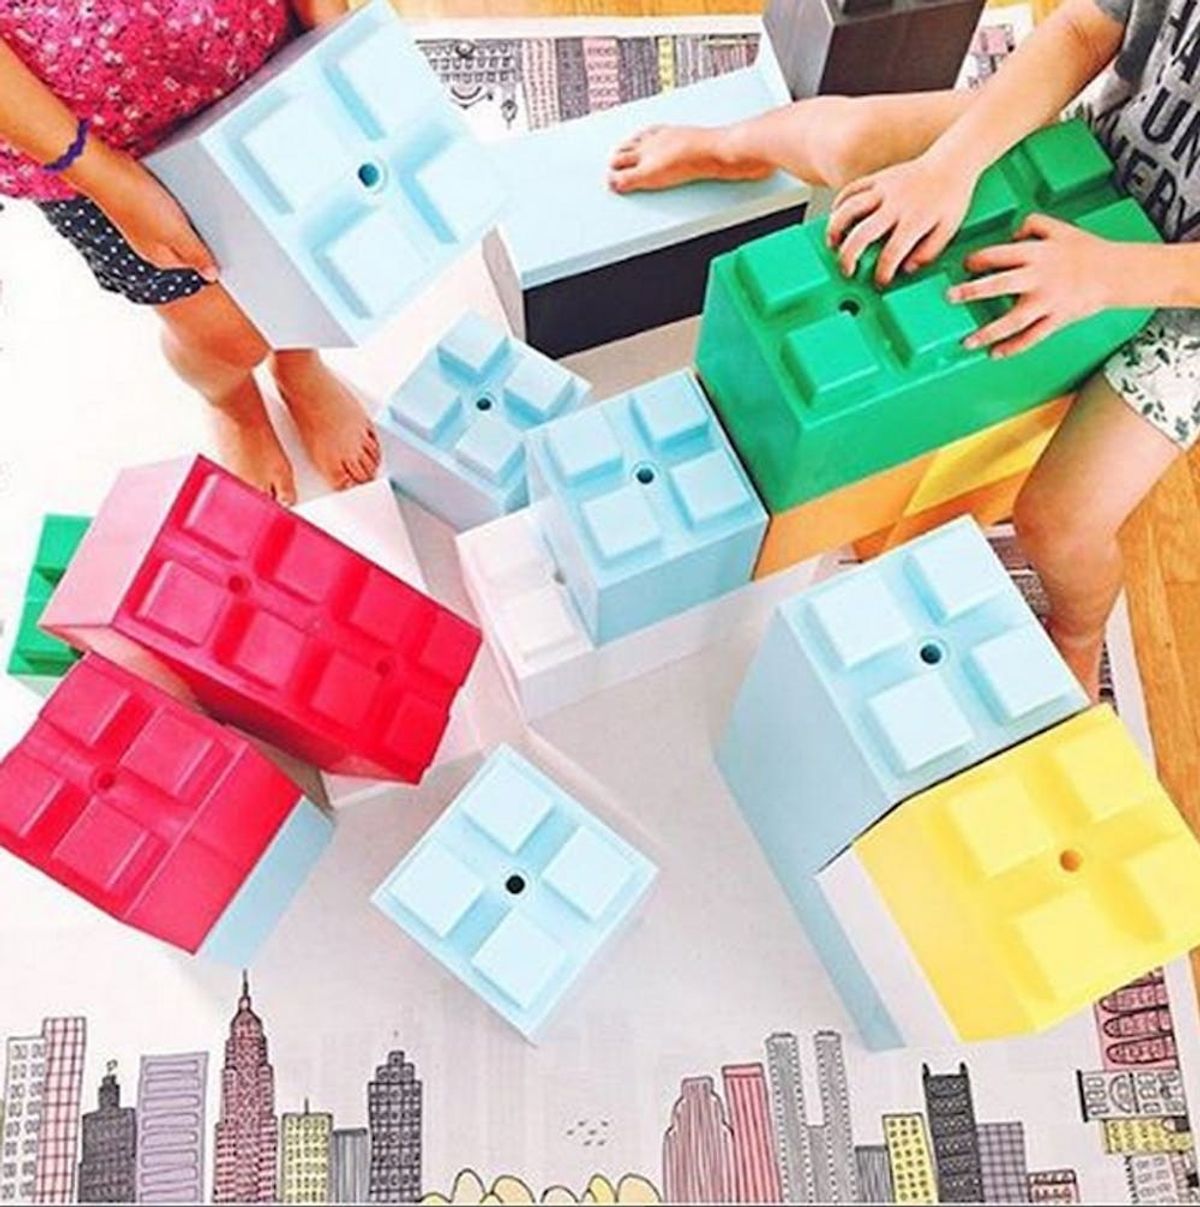 You Can Build Your Own Furniture With These Giant LEGO-like Blocks